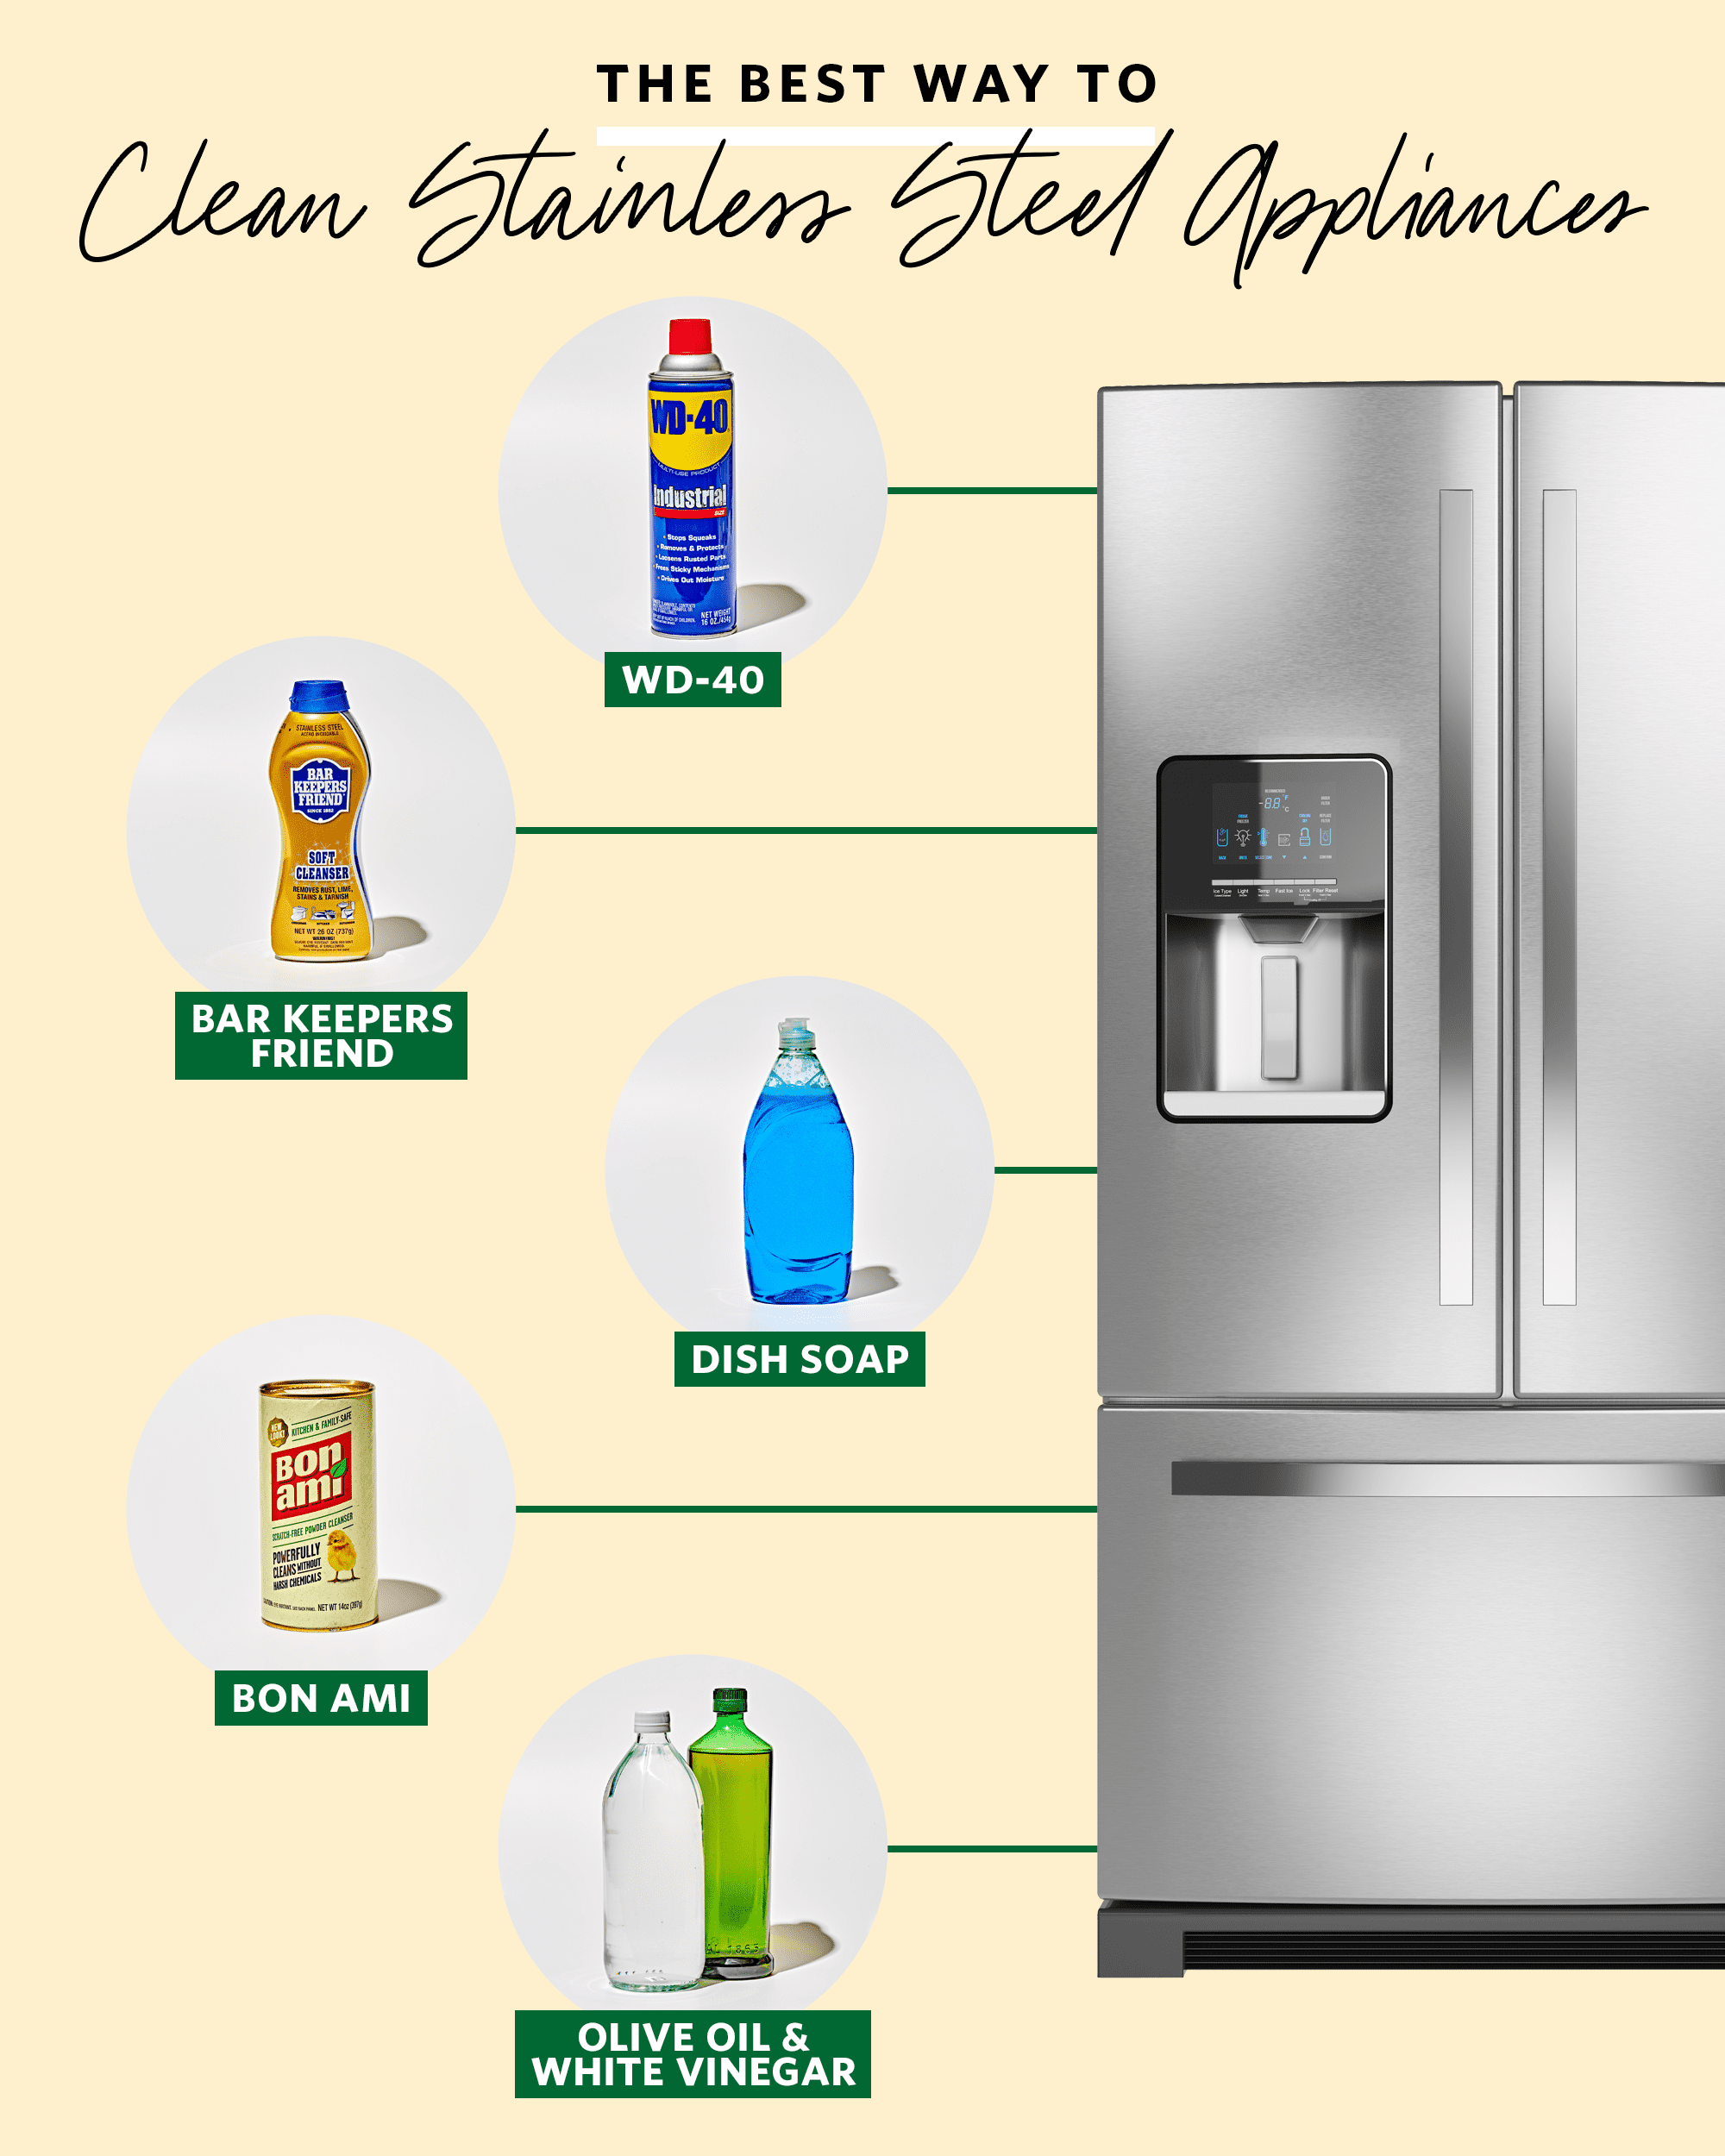 10 Tips for a Cleaner Refrigerator